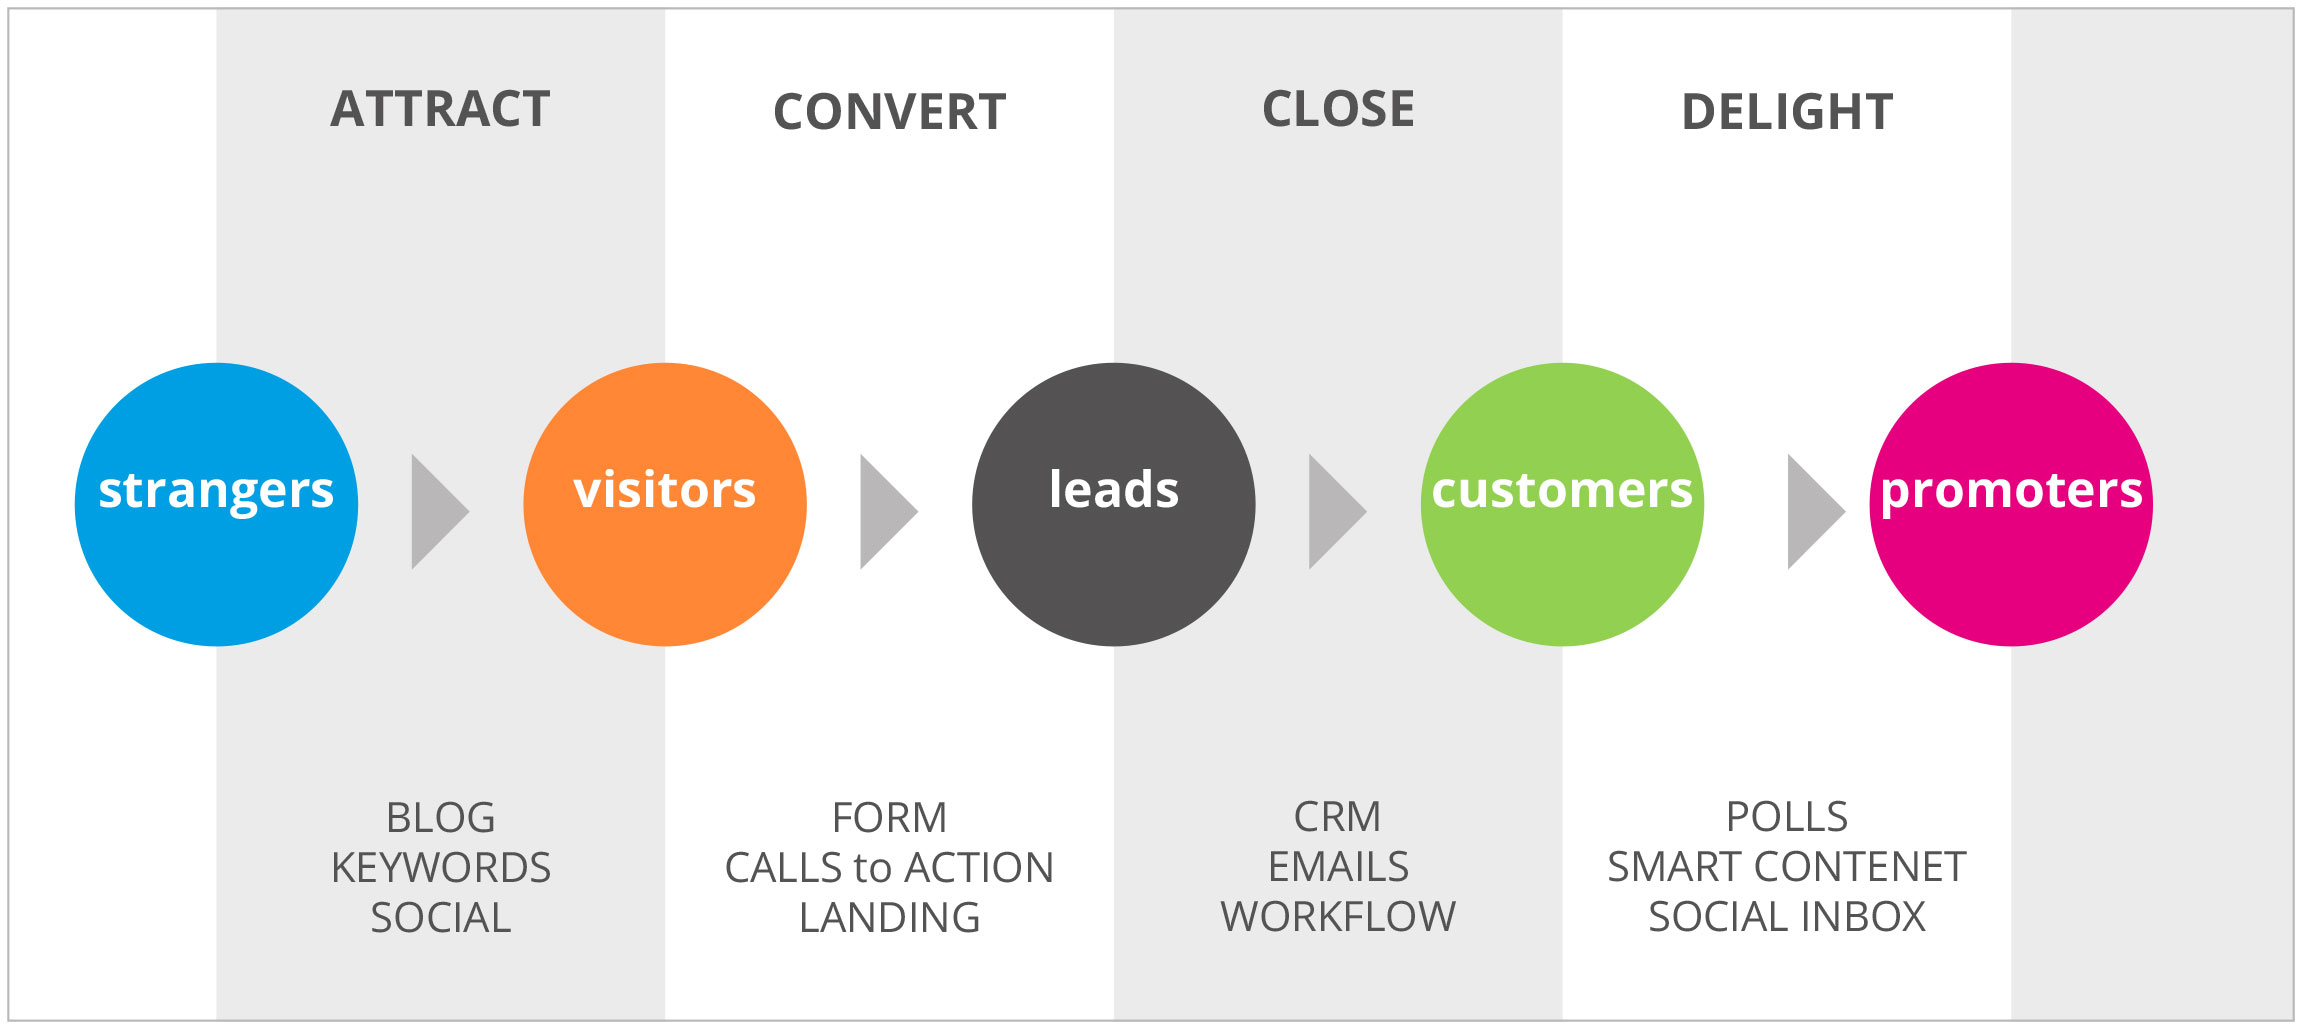 CRM AND MARKETING